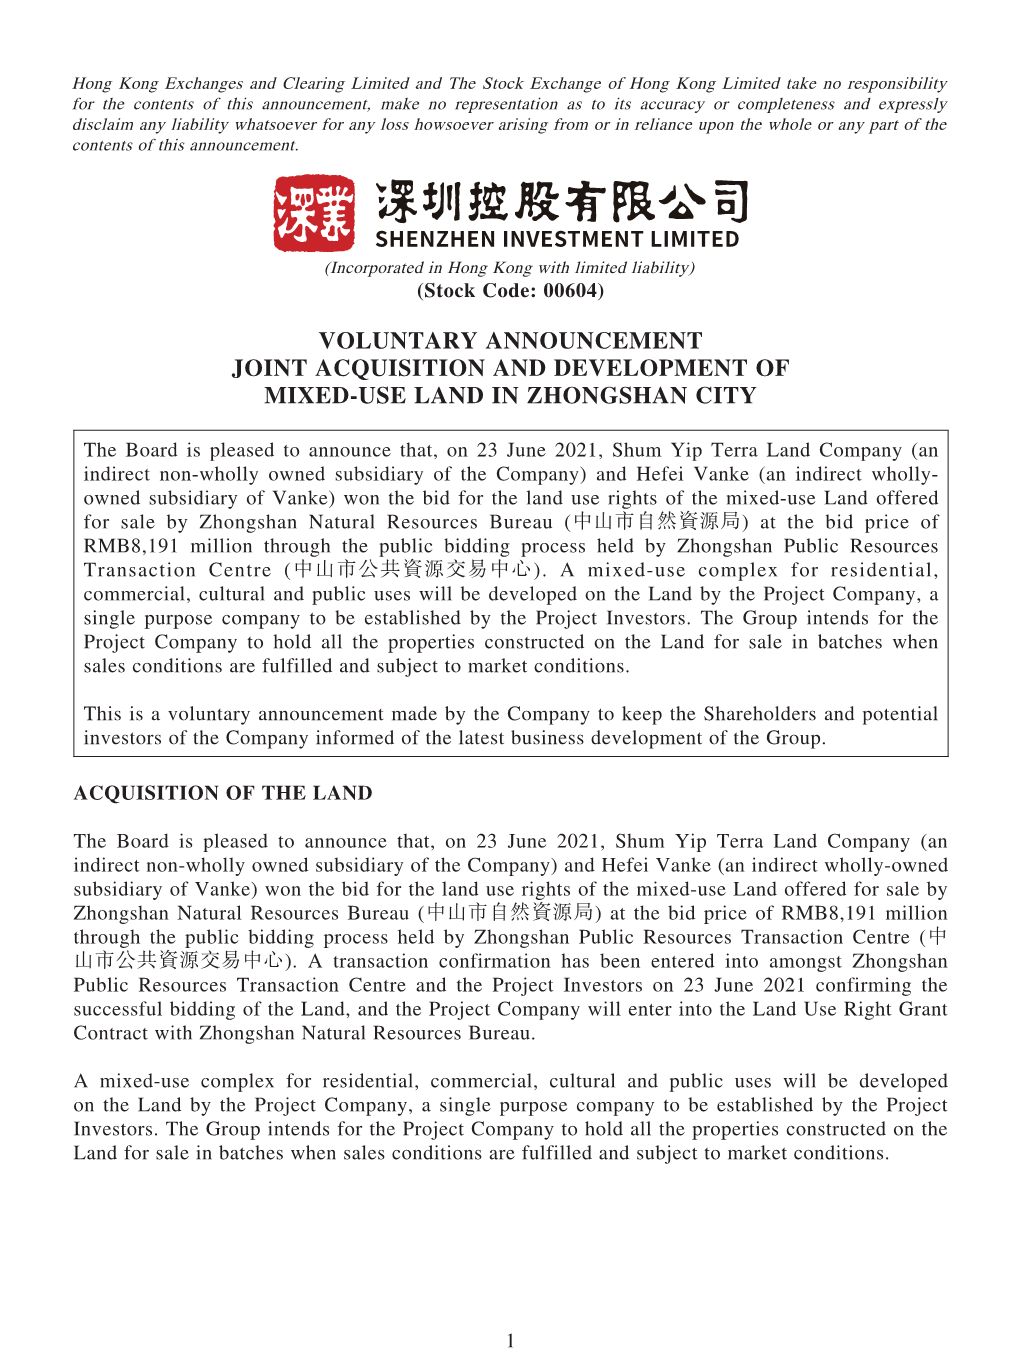 Voluntary Announcement Joint Acquisition and Development of Mixed-Use Land in Zhongshan City